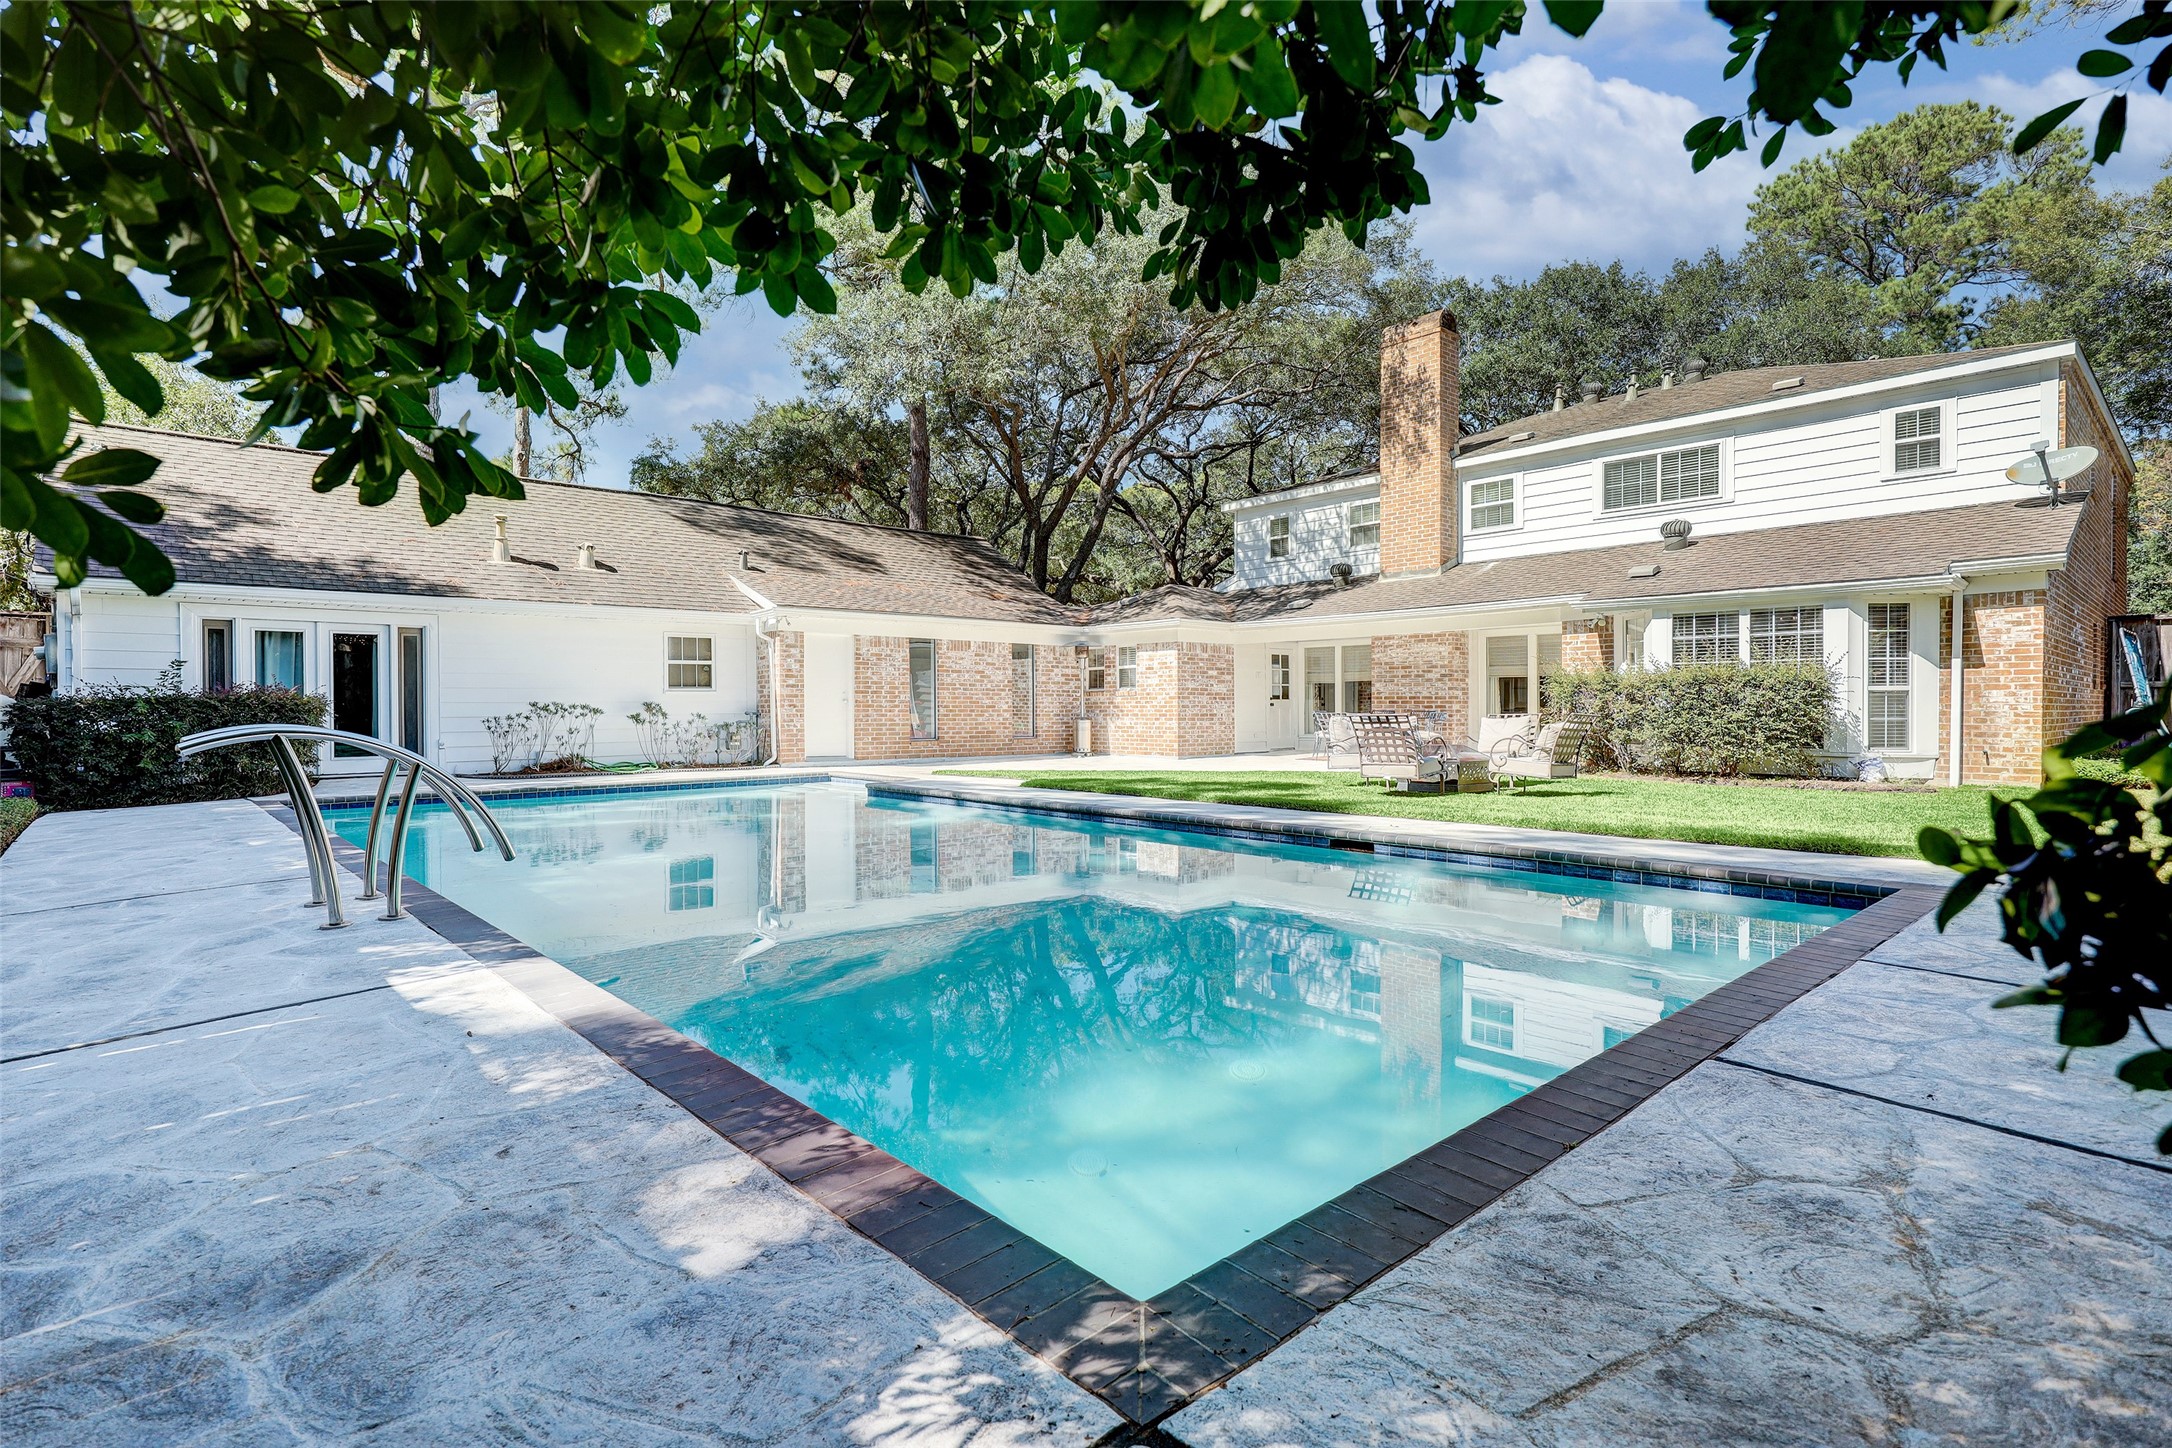 Backyard provides a large pool and no shortage of green space. Access to the finished studio can be seen to the far left.